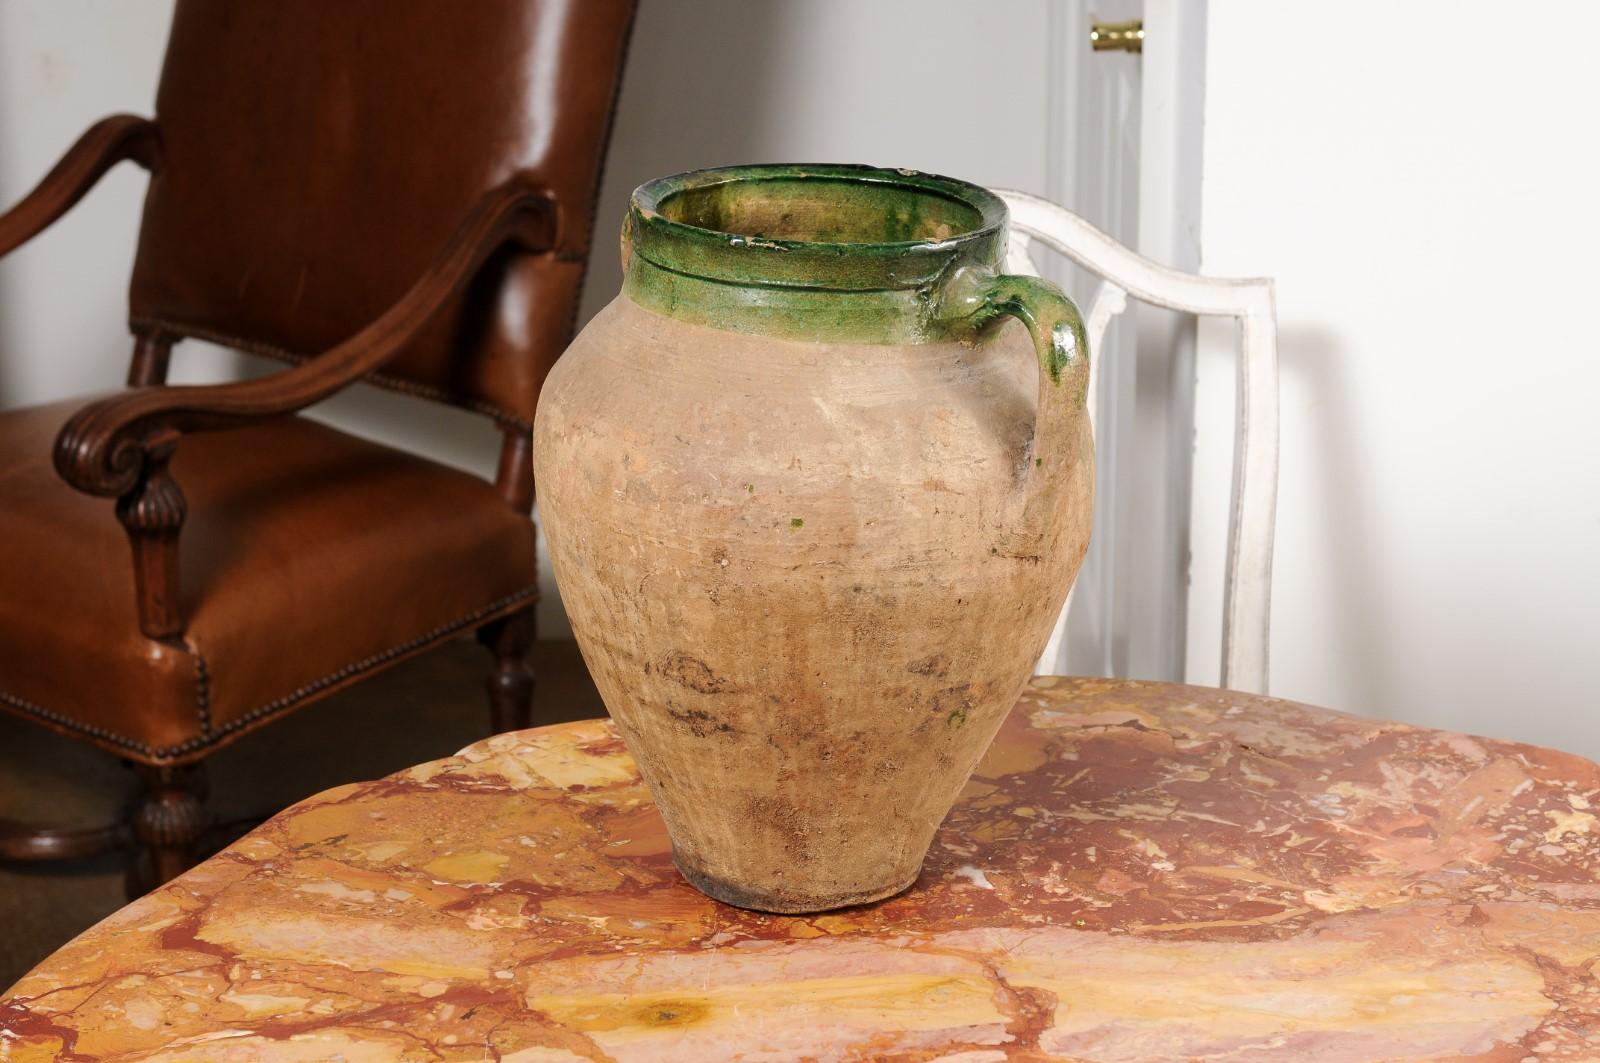 20th Century English Rustic 1930s Terracotta Olive Oil Jar Circa 1930 with Green Glazed Top For Sale